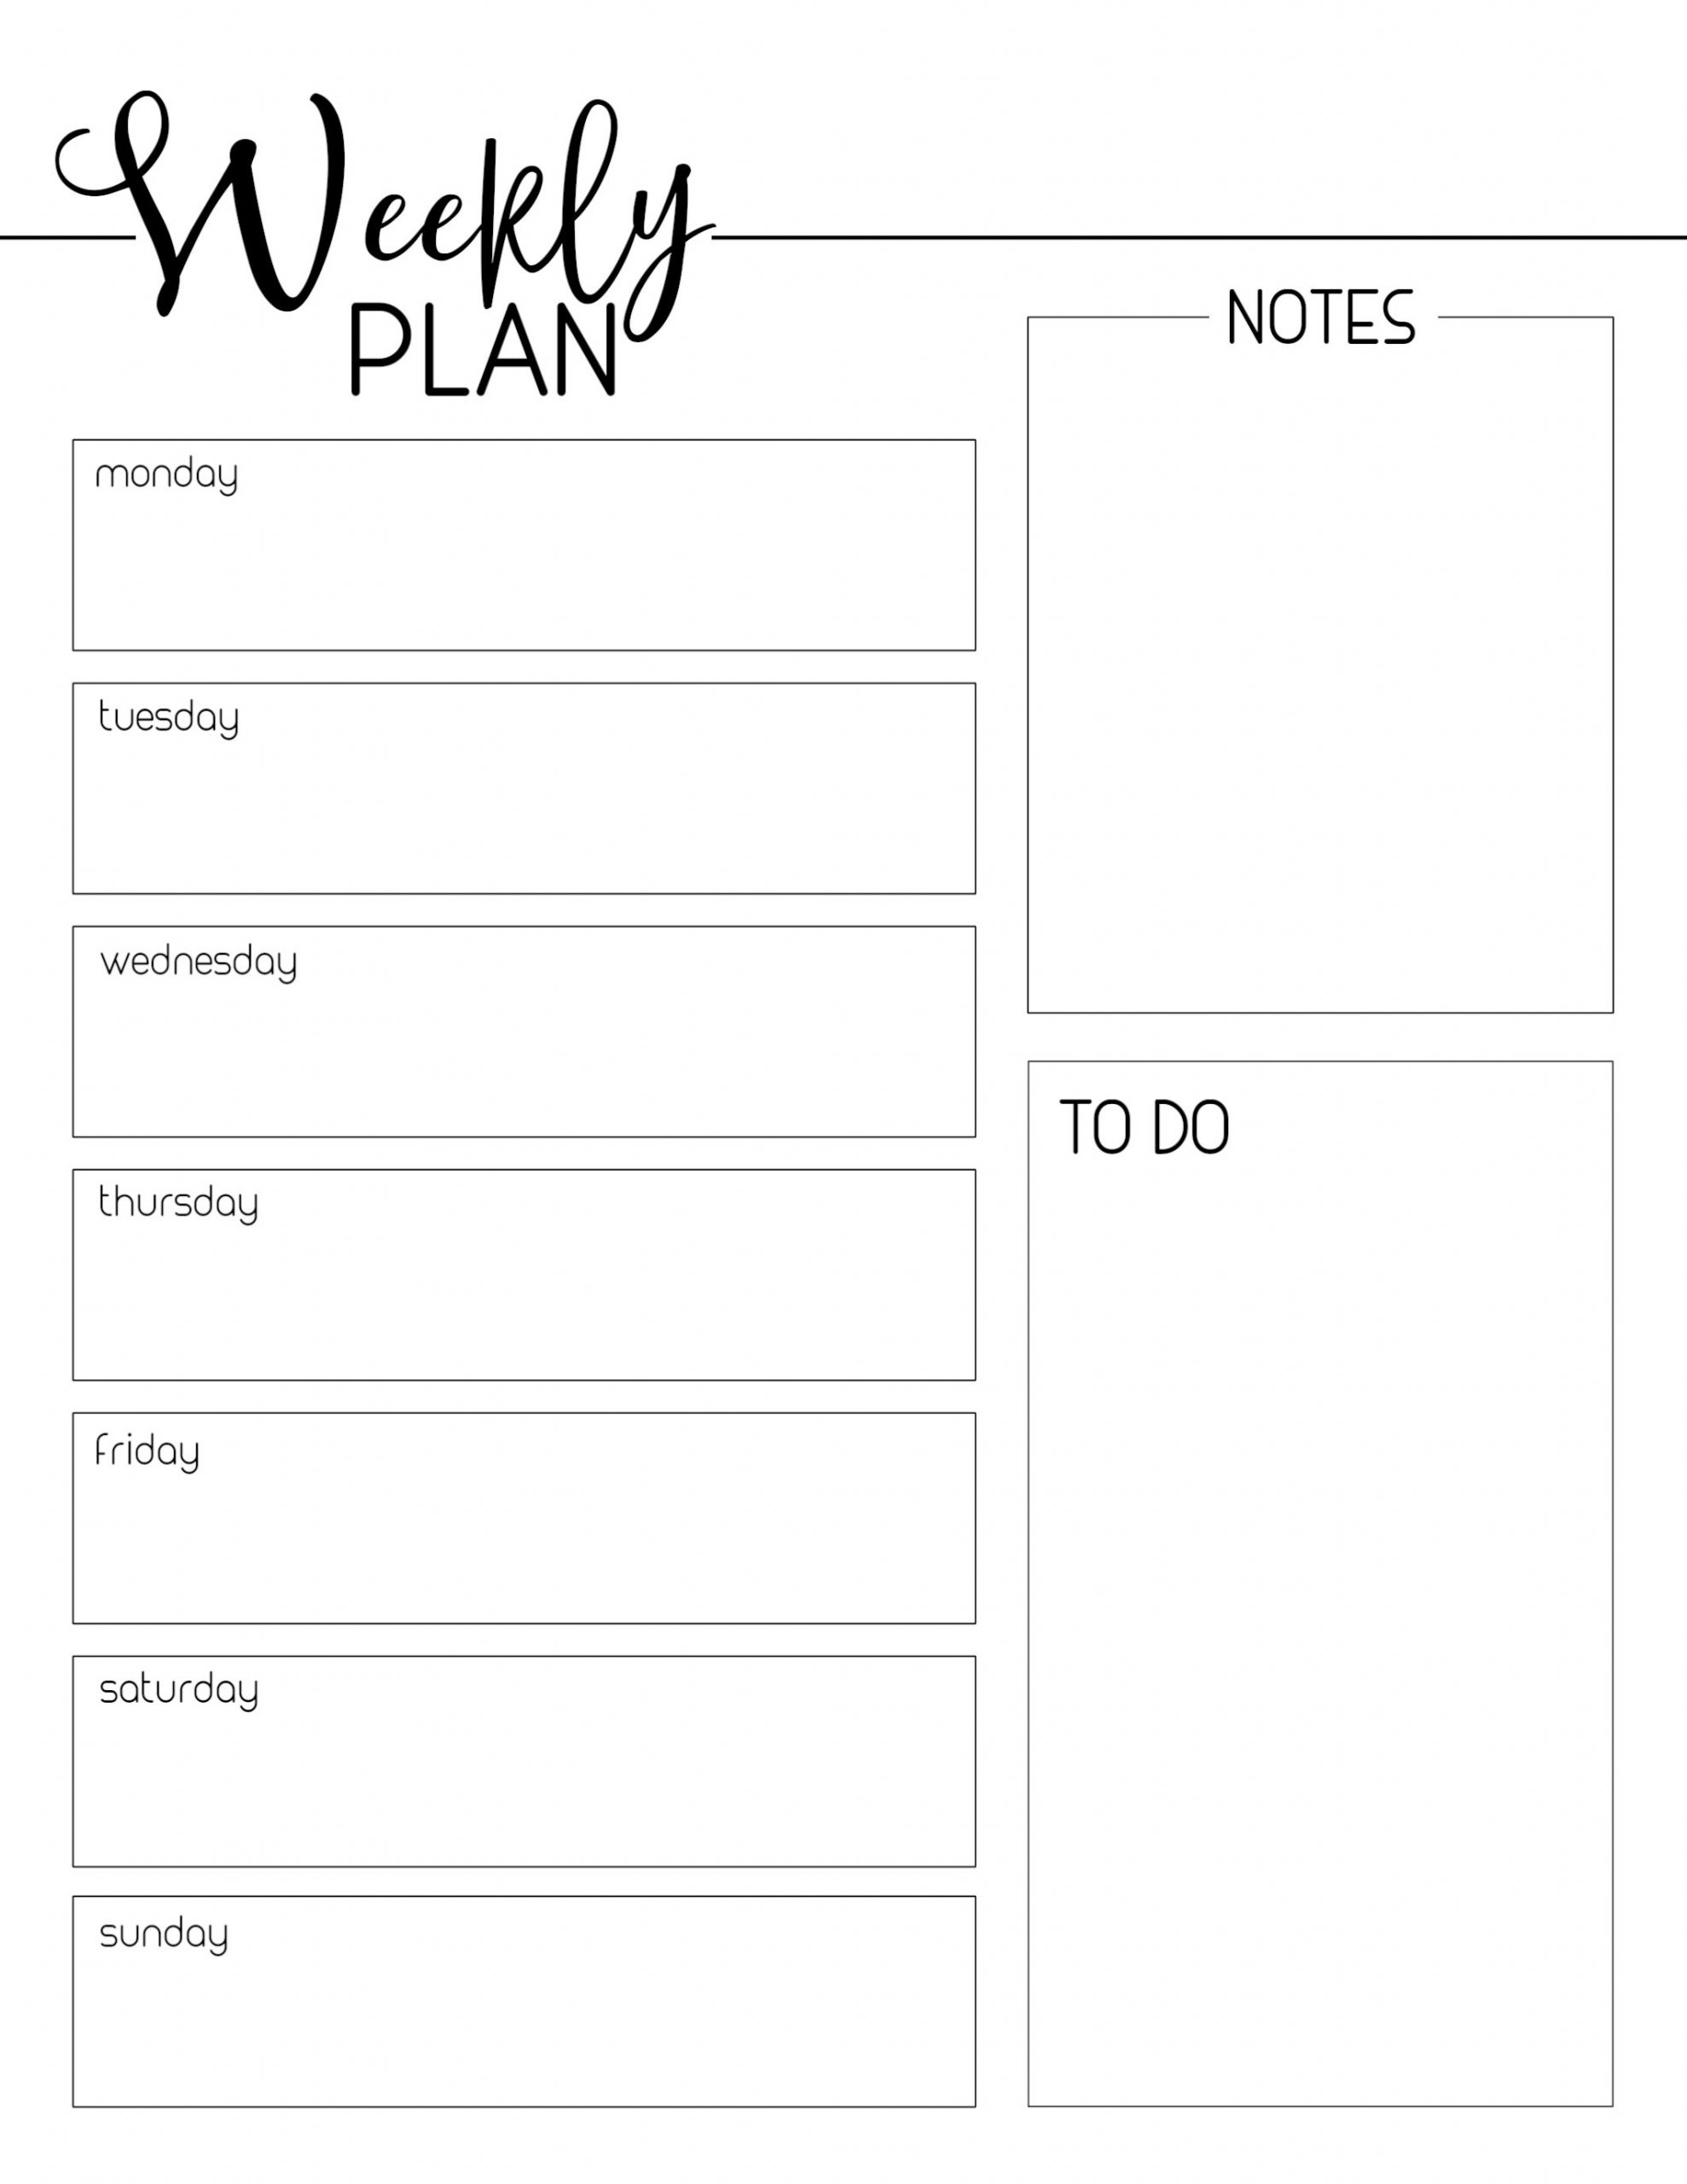 Weekly Planner Template Free Printable - Paper Trail Design